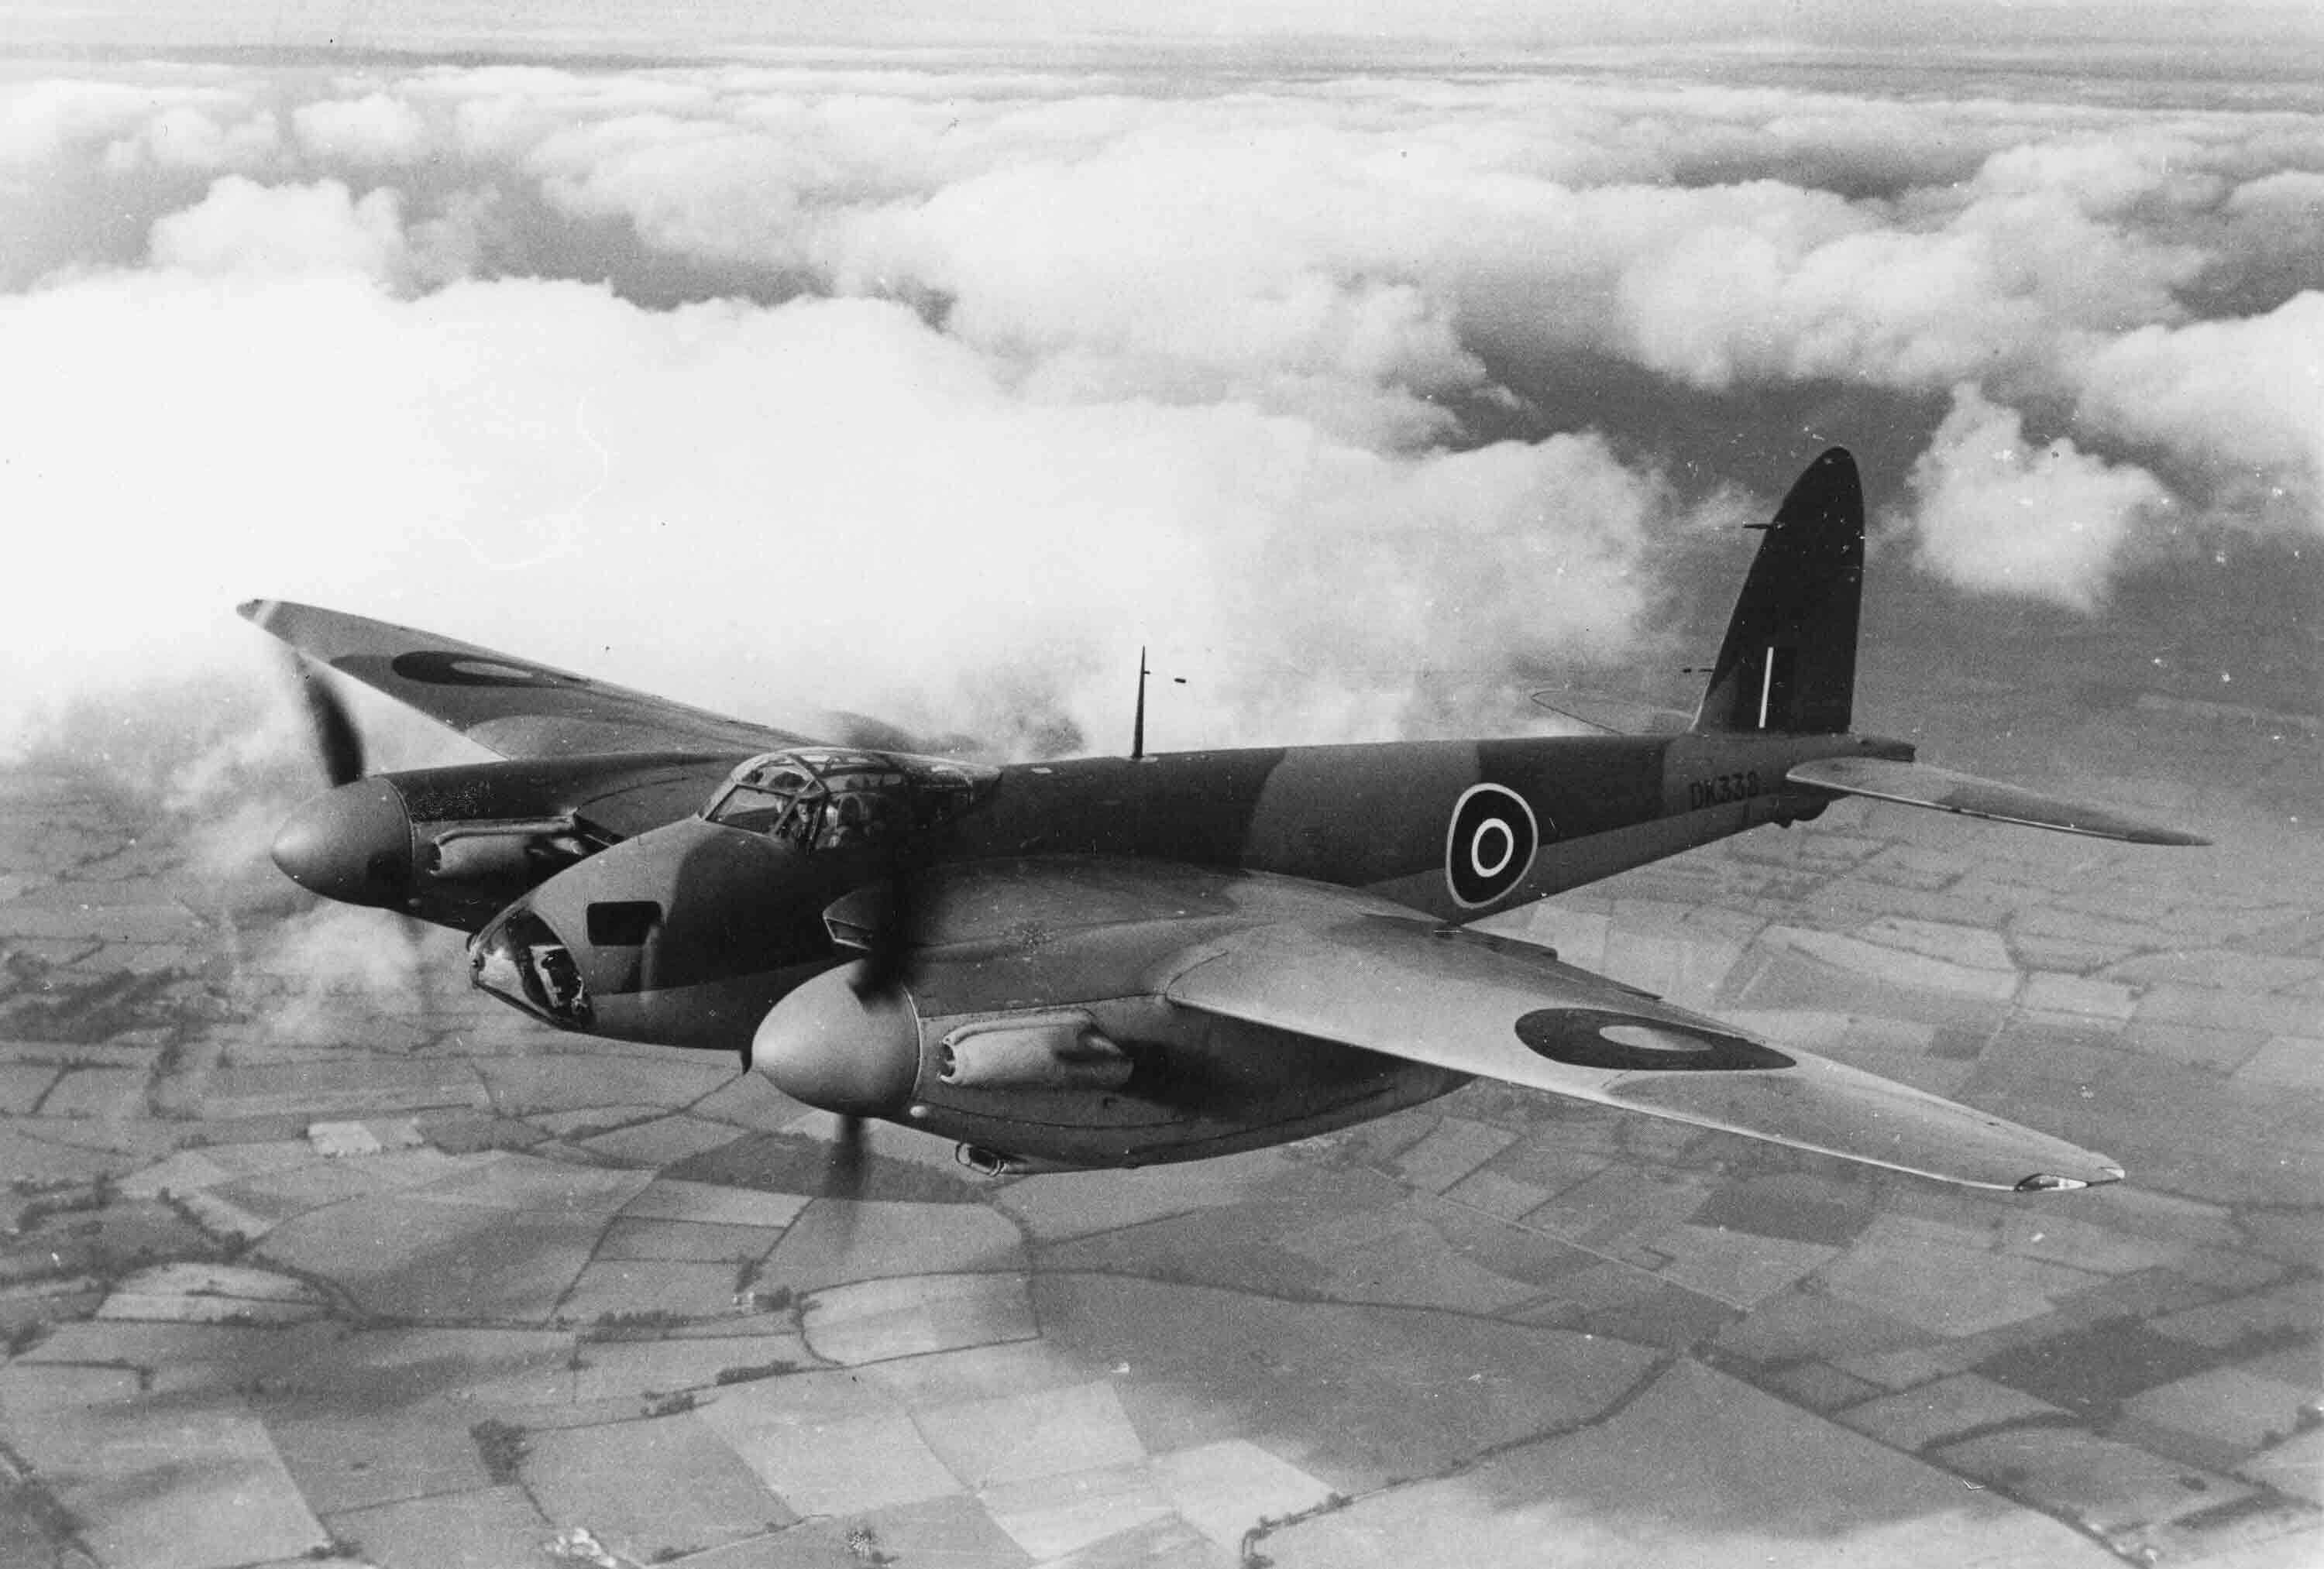 De Havilland Mosquito relied heavily on adhesives for its construction